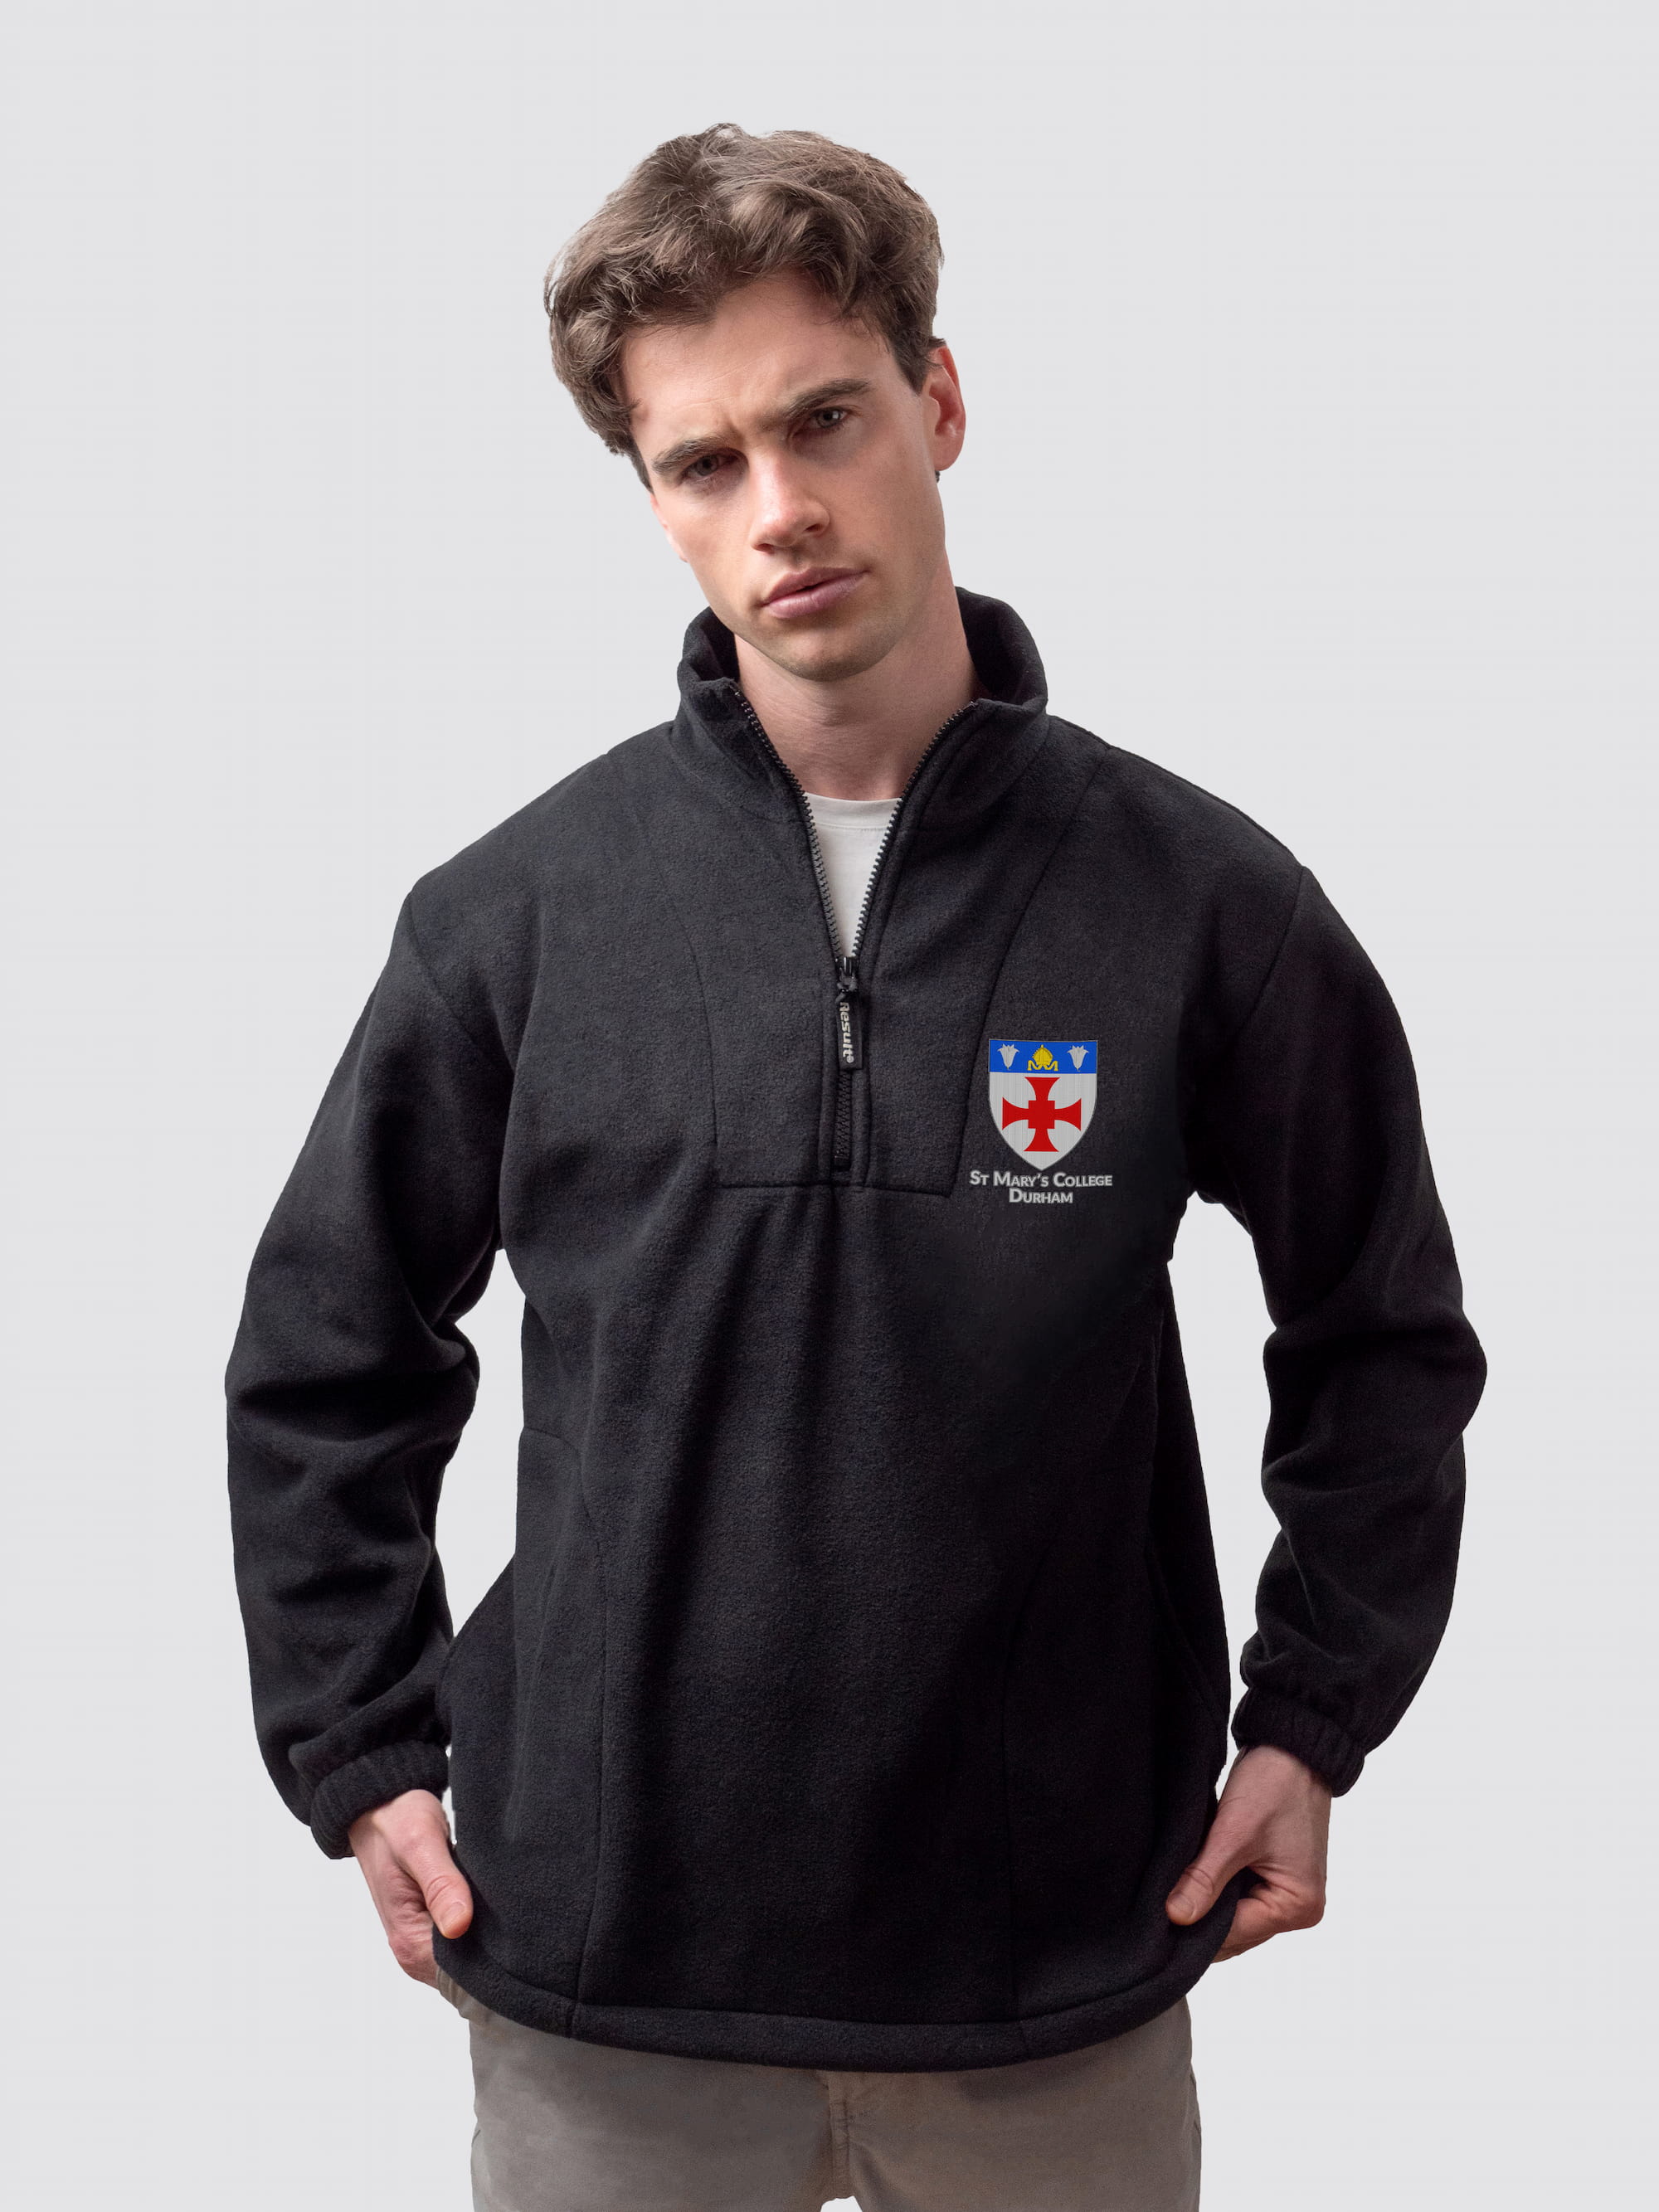 Durham University fleece, with custom embroidered initials and St Mary's crest